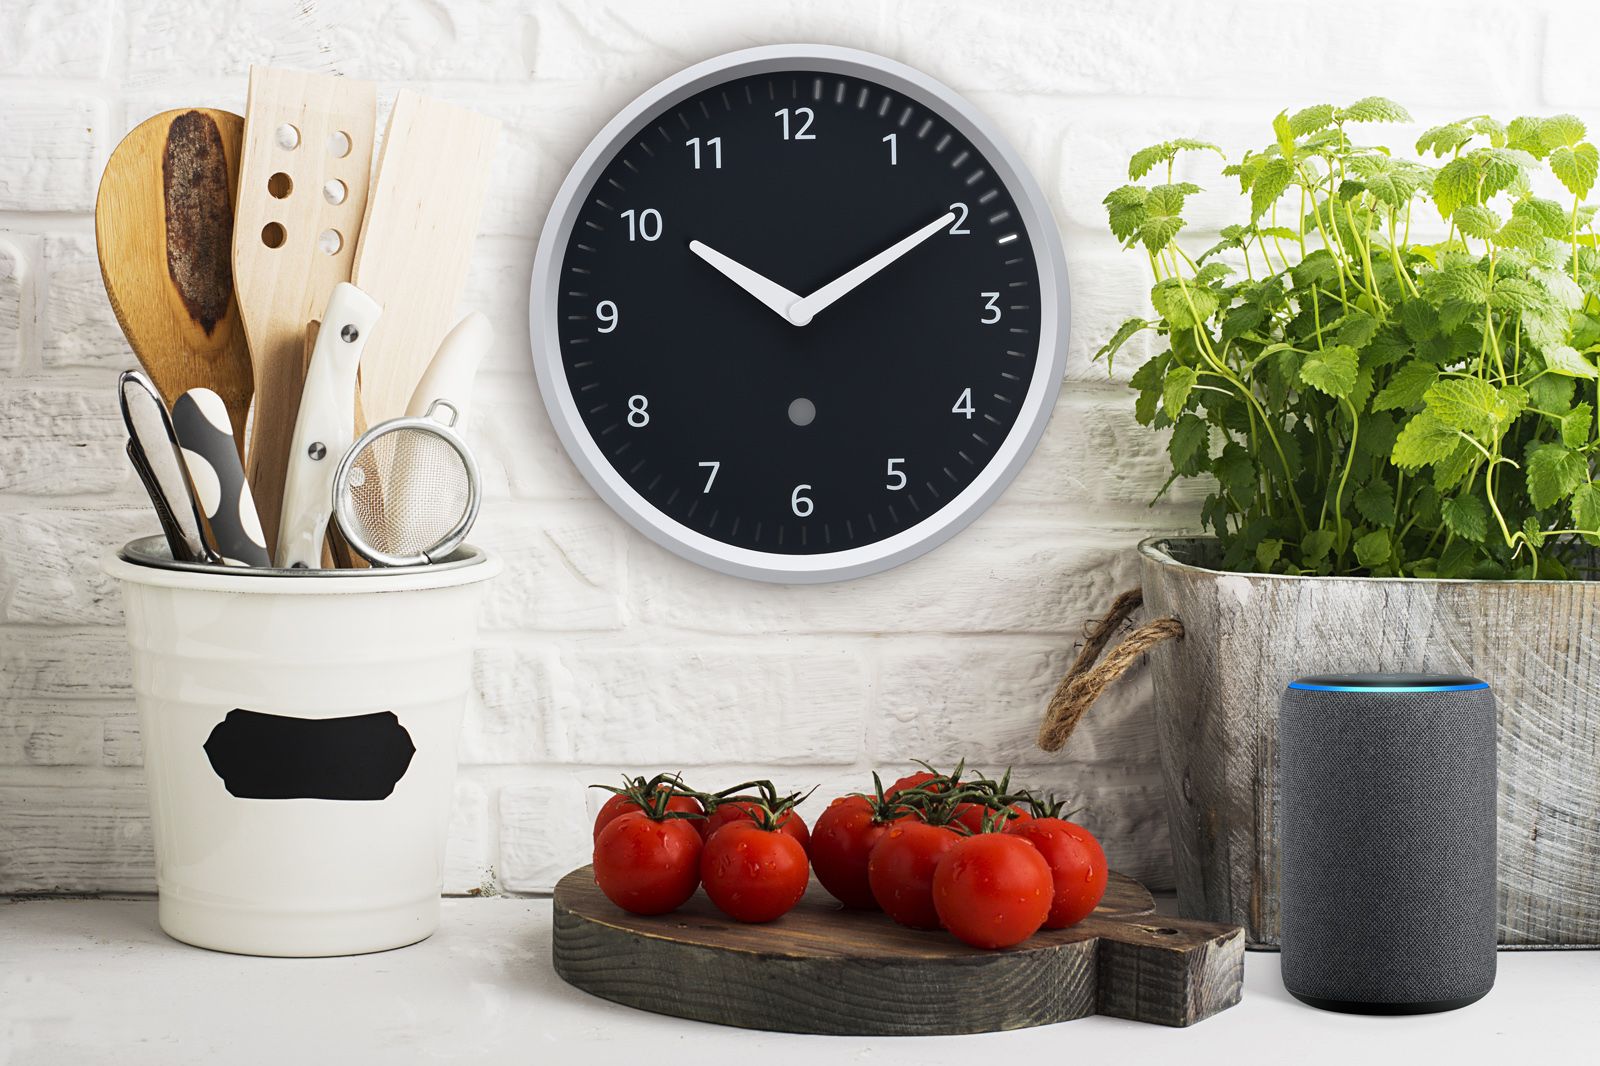 Amazon finally releases the Amazon Echo Wall Clock to visually display timers image 1